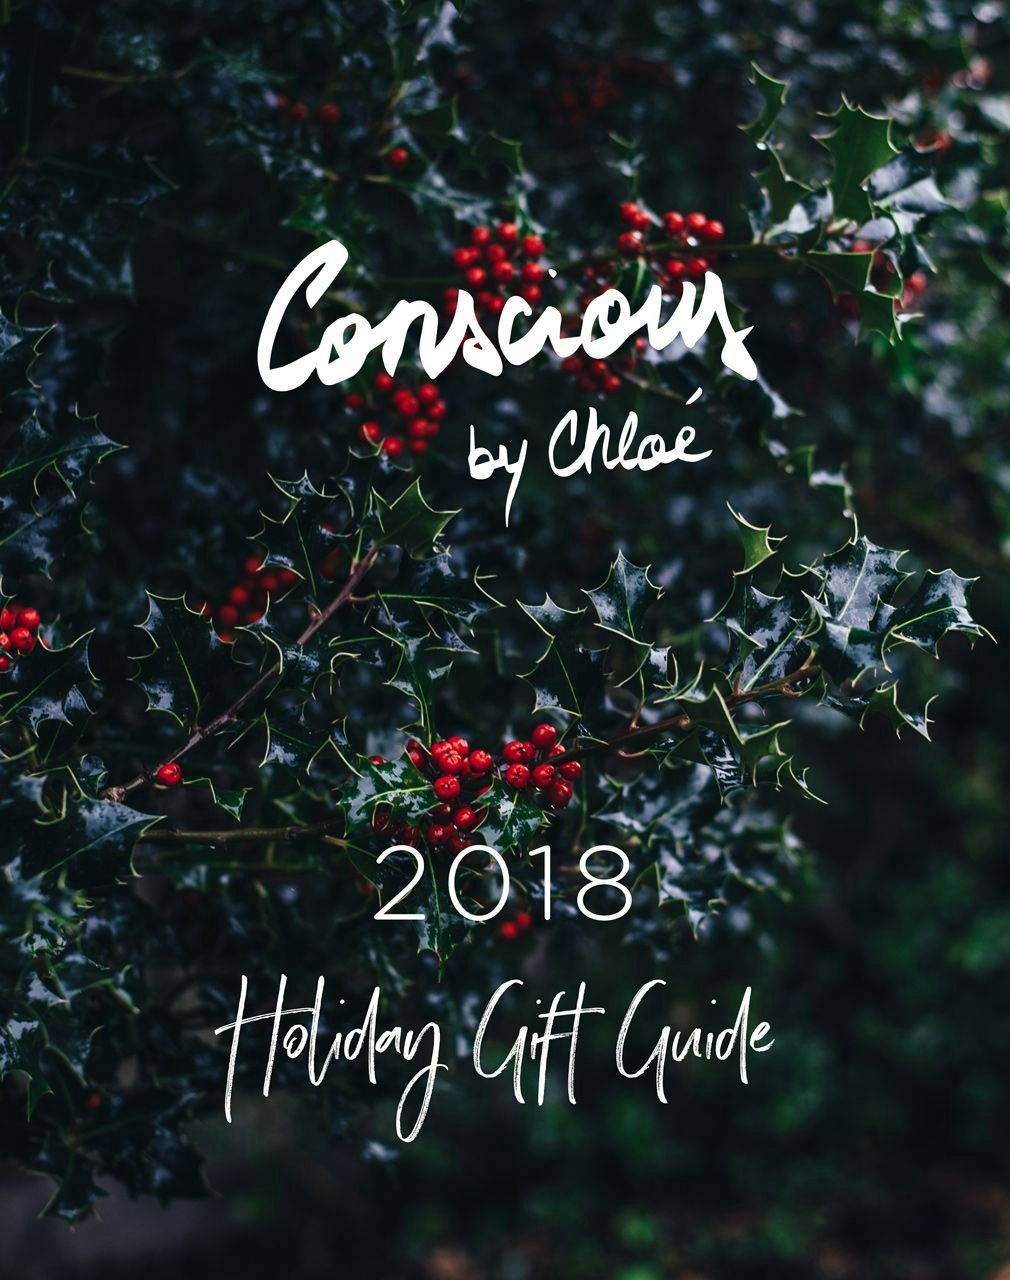 The Conscious by Chloé 2018 Holiday Gift Guide 2018